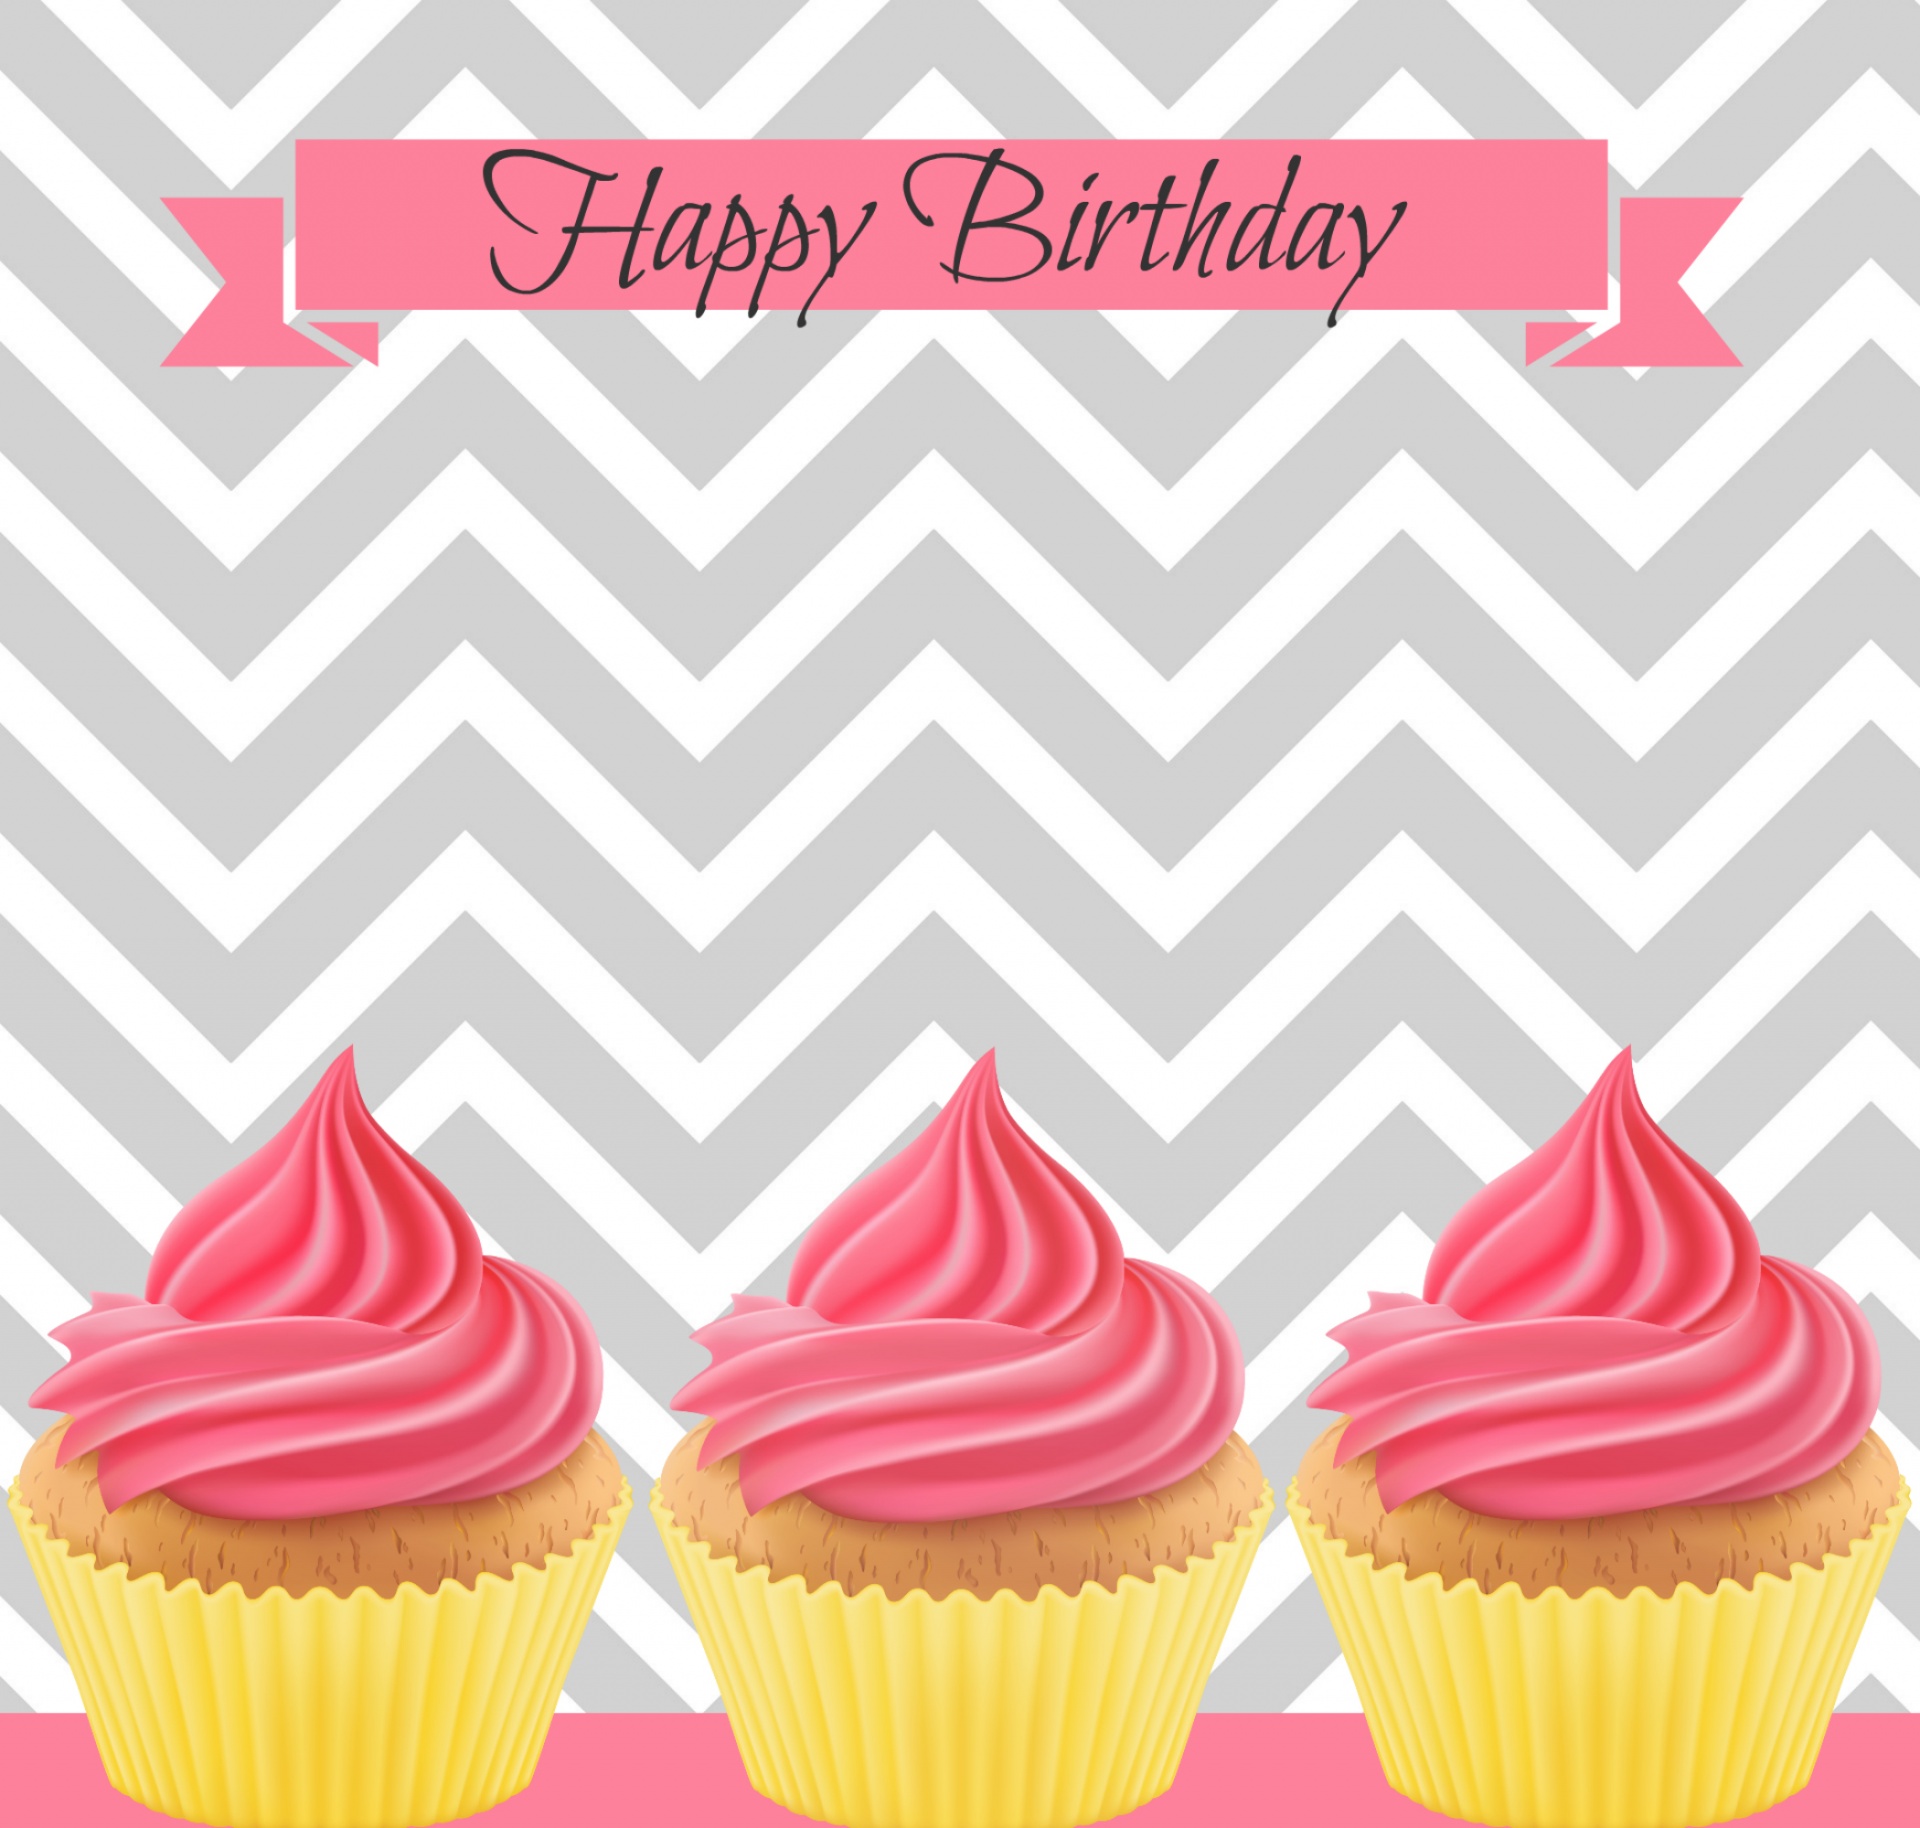 free-birthday-card-free-stock-photo-public-domain-pictures